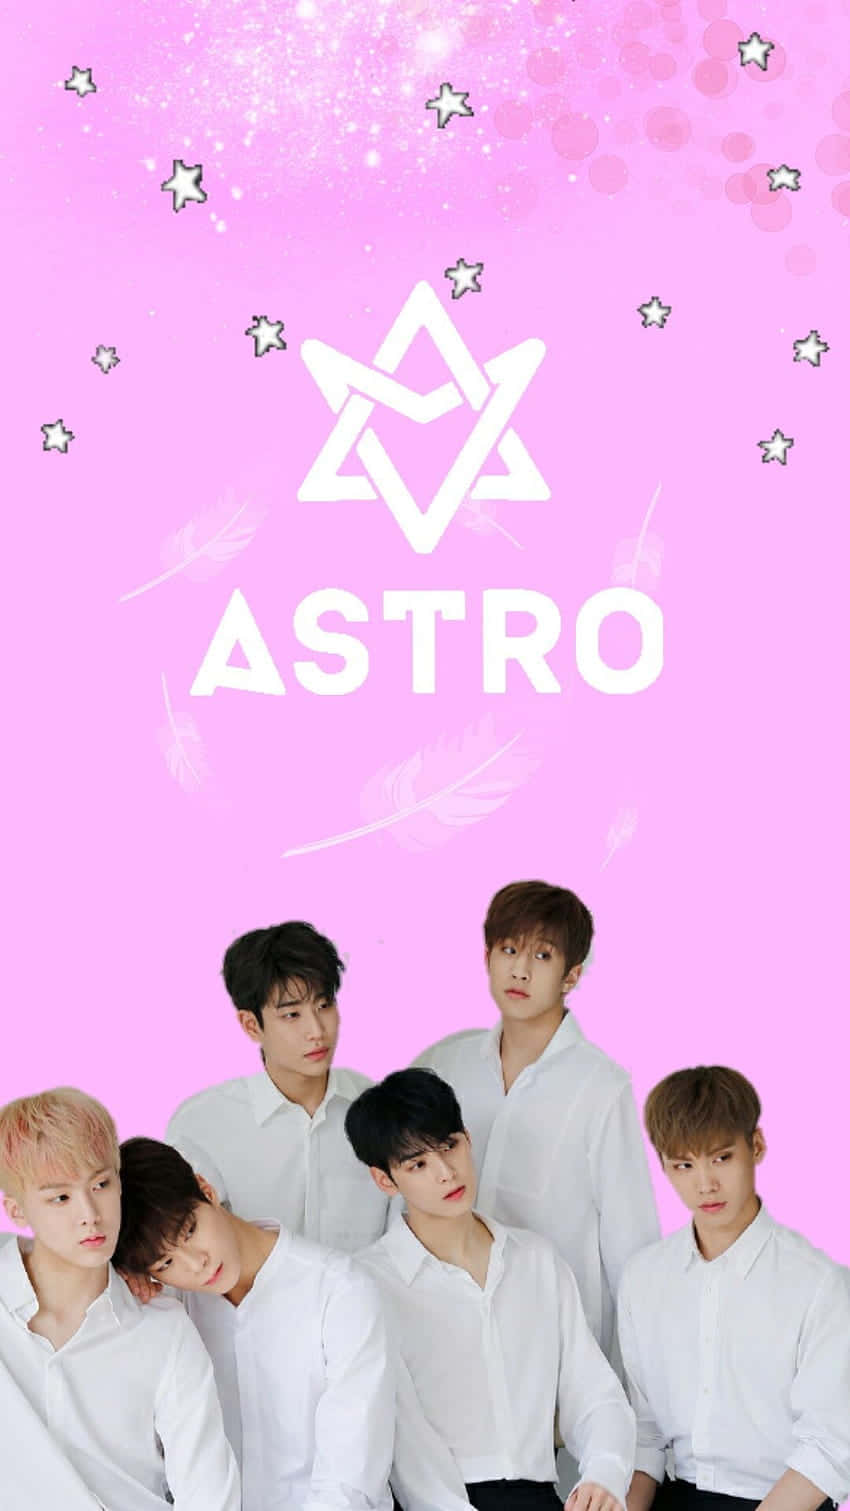 Astro Kpop Group Pink Background Wallpaper